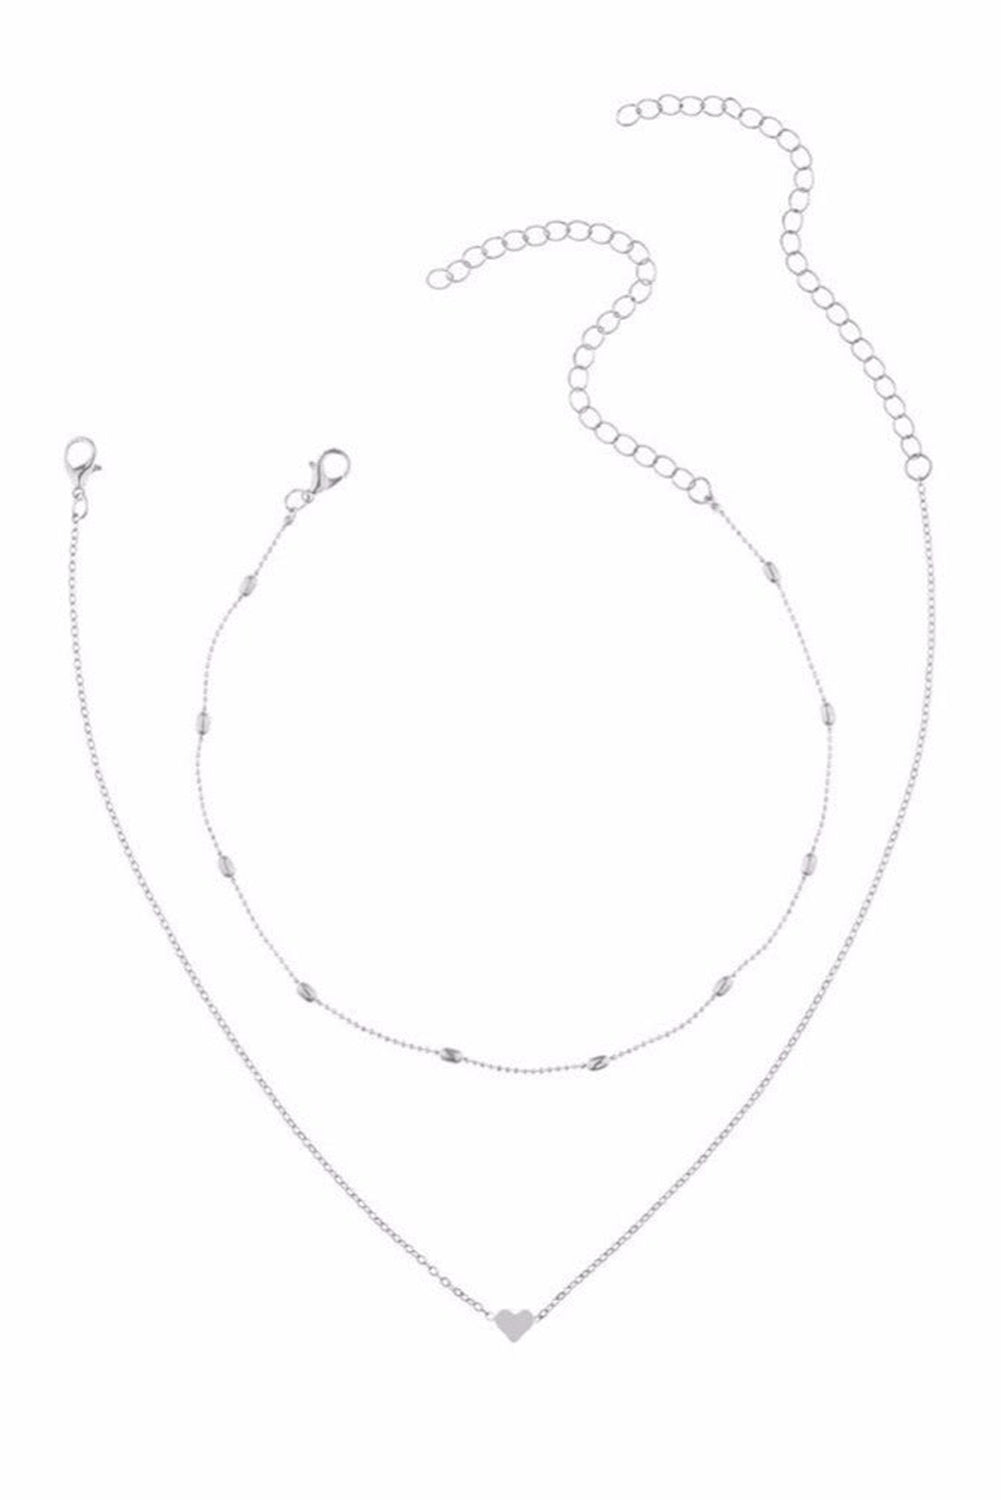 Silver Valentine Heart Shaped Layered Chain Necklace